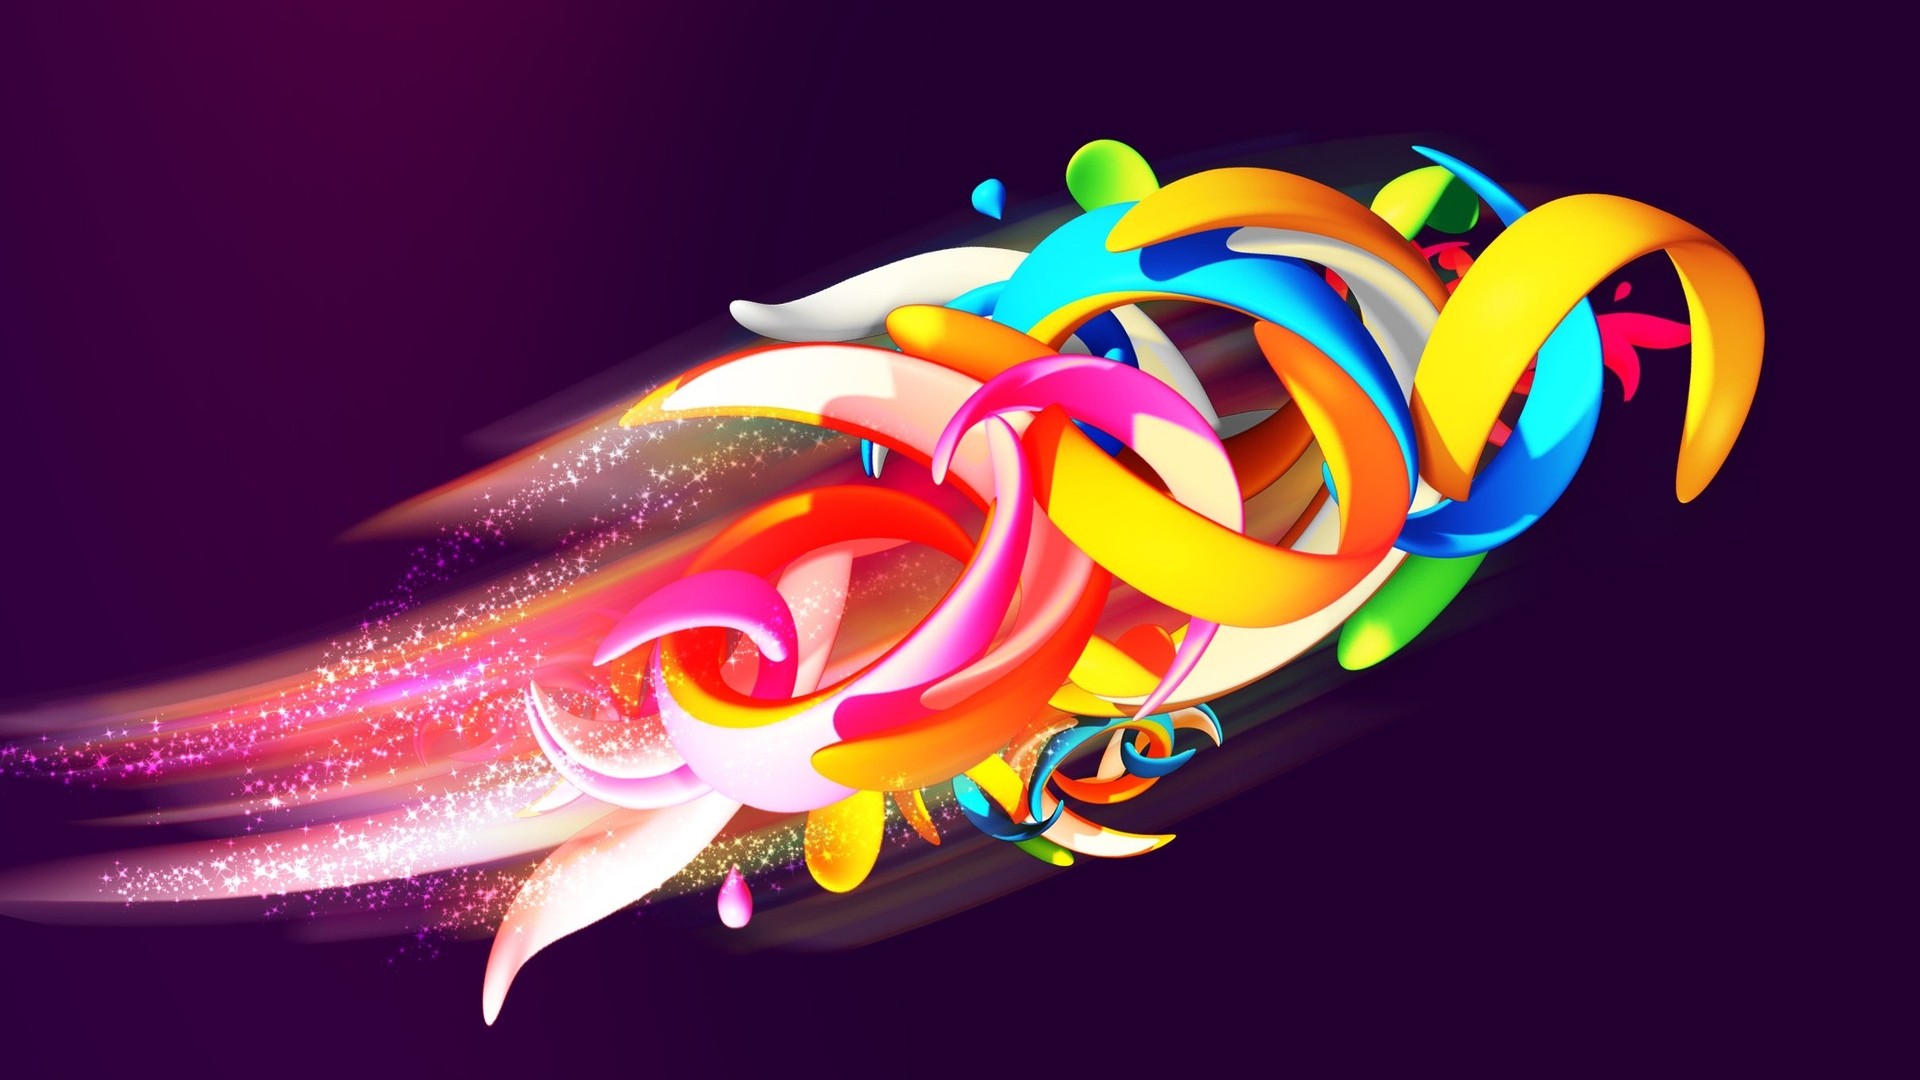 Colorful Desktop Backgrounds Abstract 3D Shapes